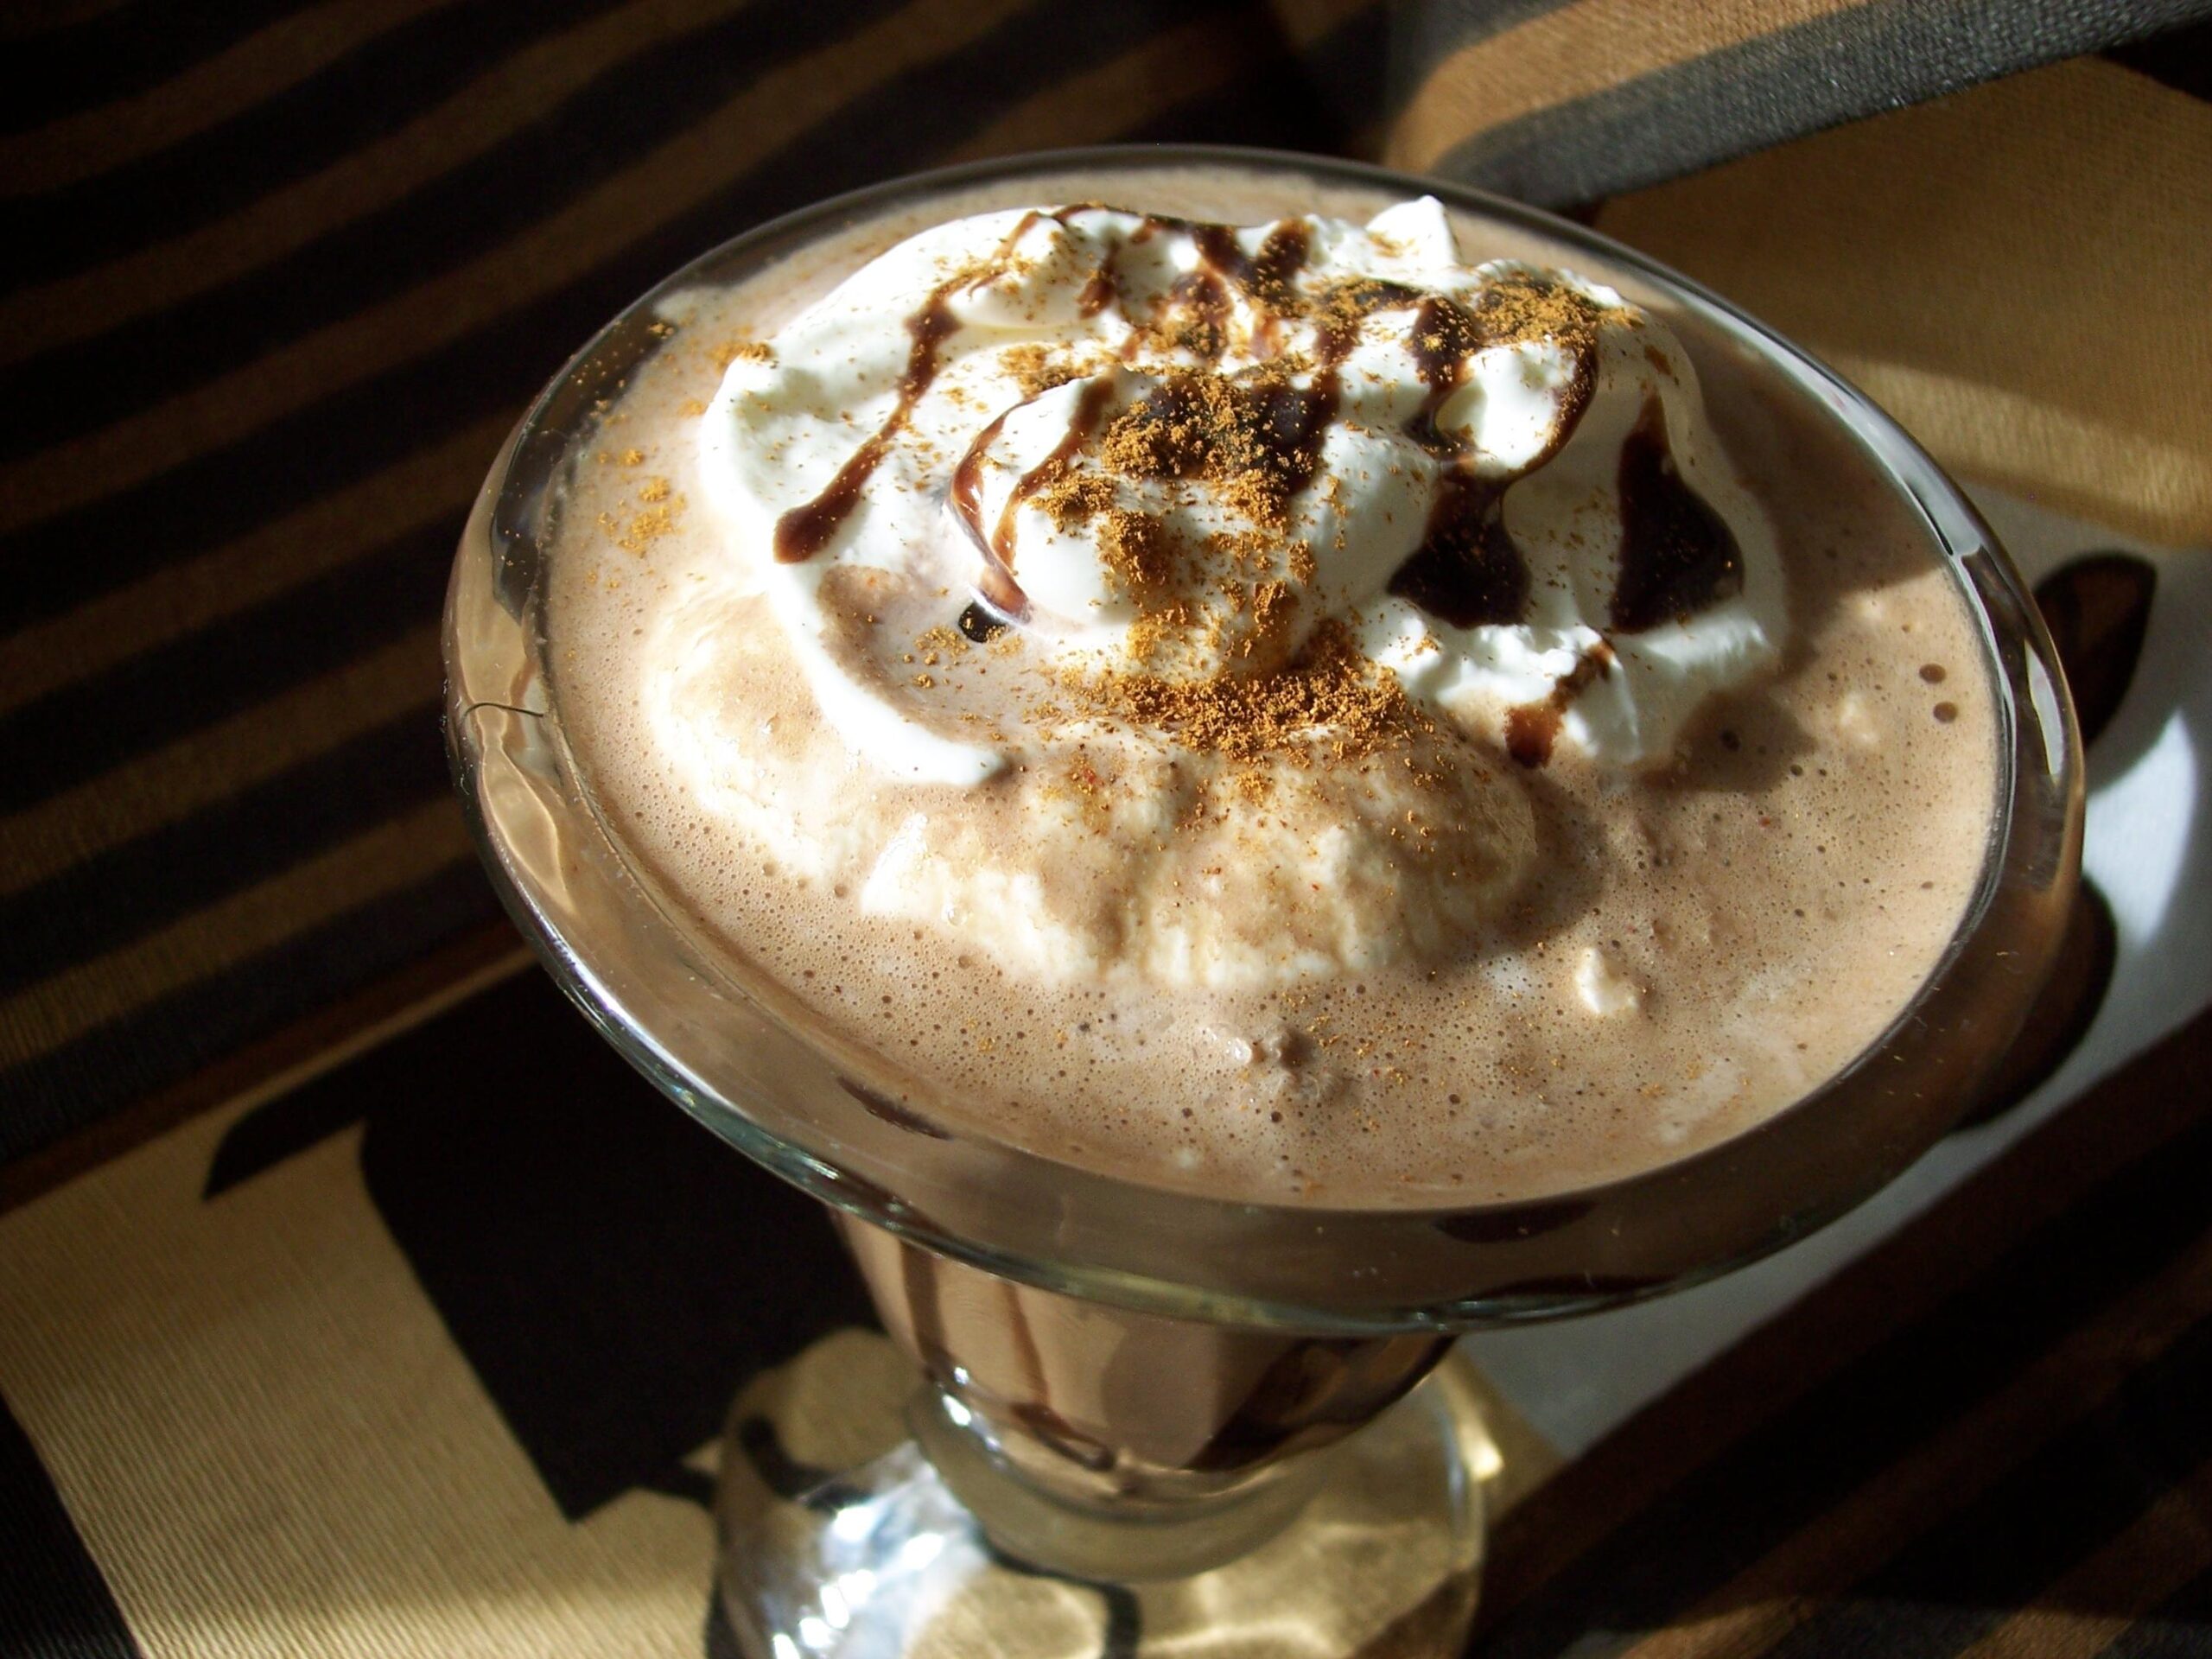  Chocolate and coffee lovers, this one's for you!